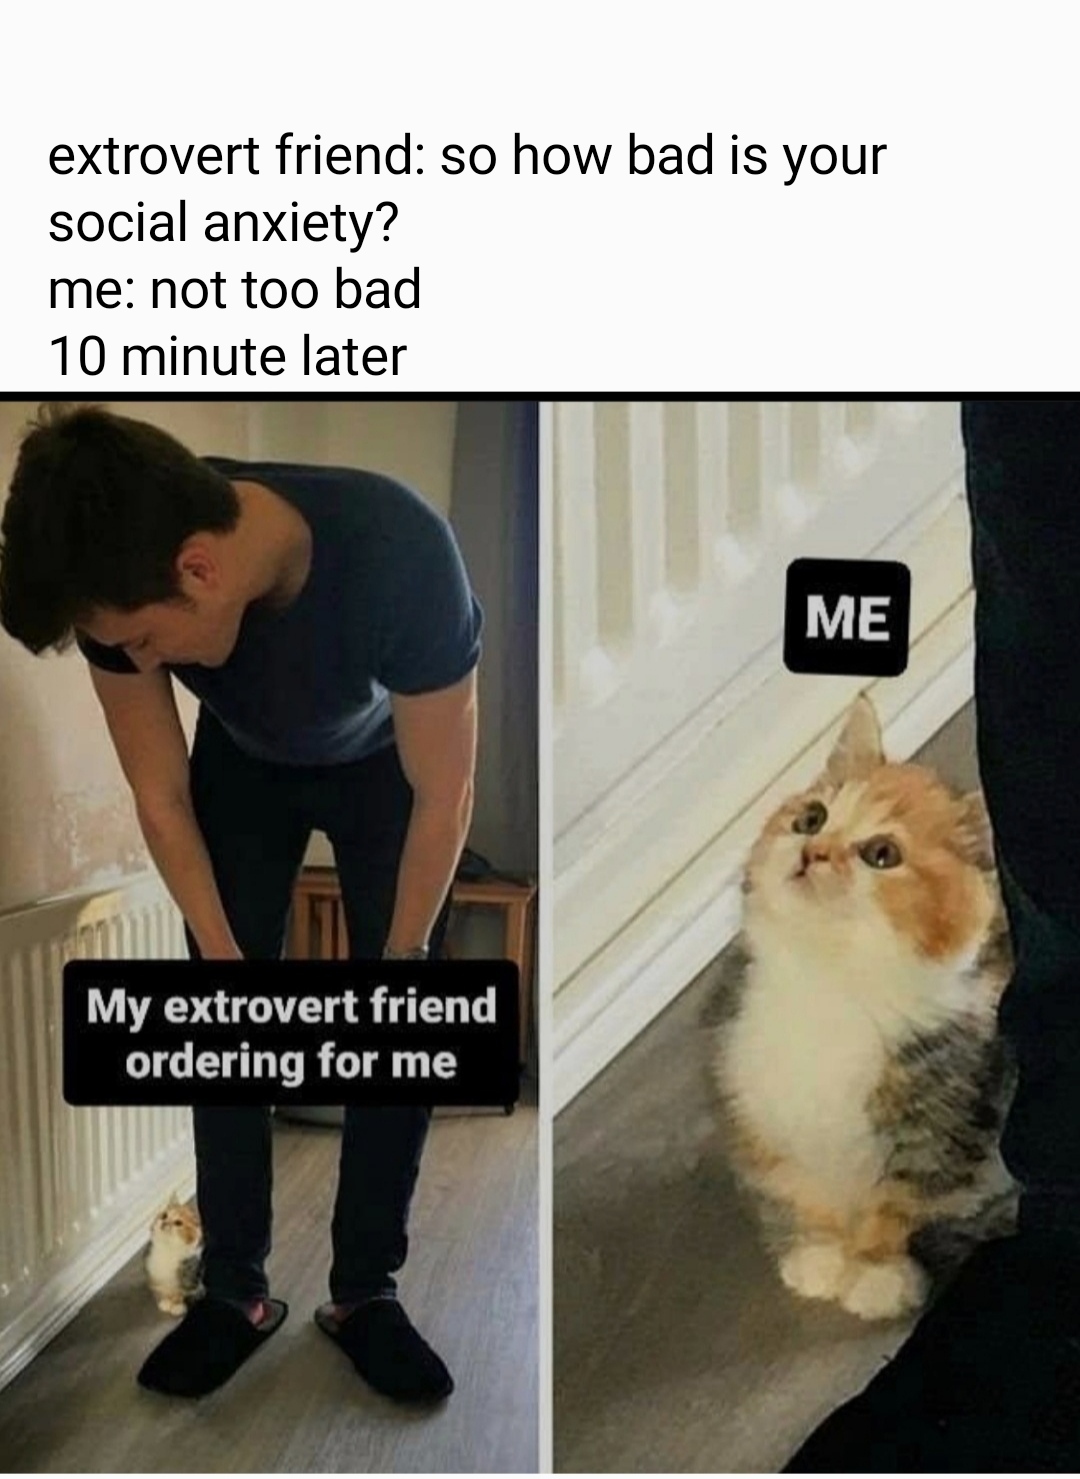 funny memes - Meme - extrovert friend so how bad is your social anxiety? me not too bad 10 minute later My extrovert friend ordering for me Me